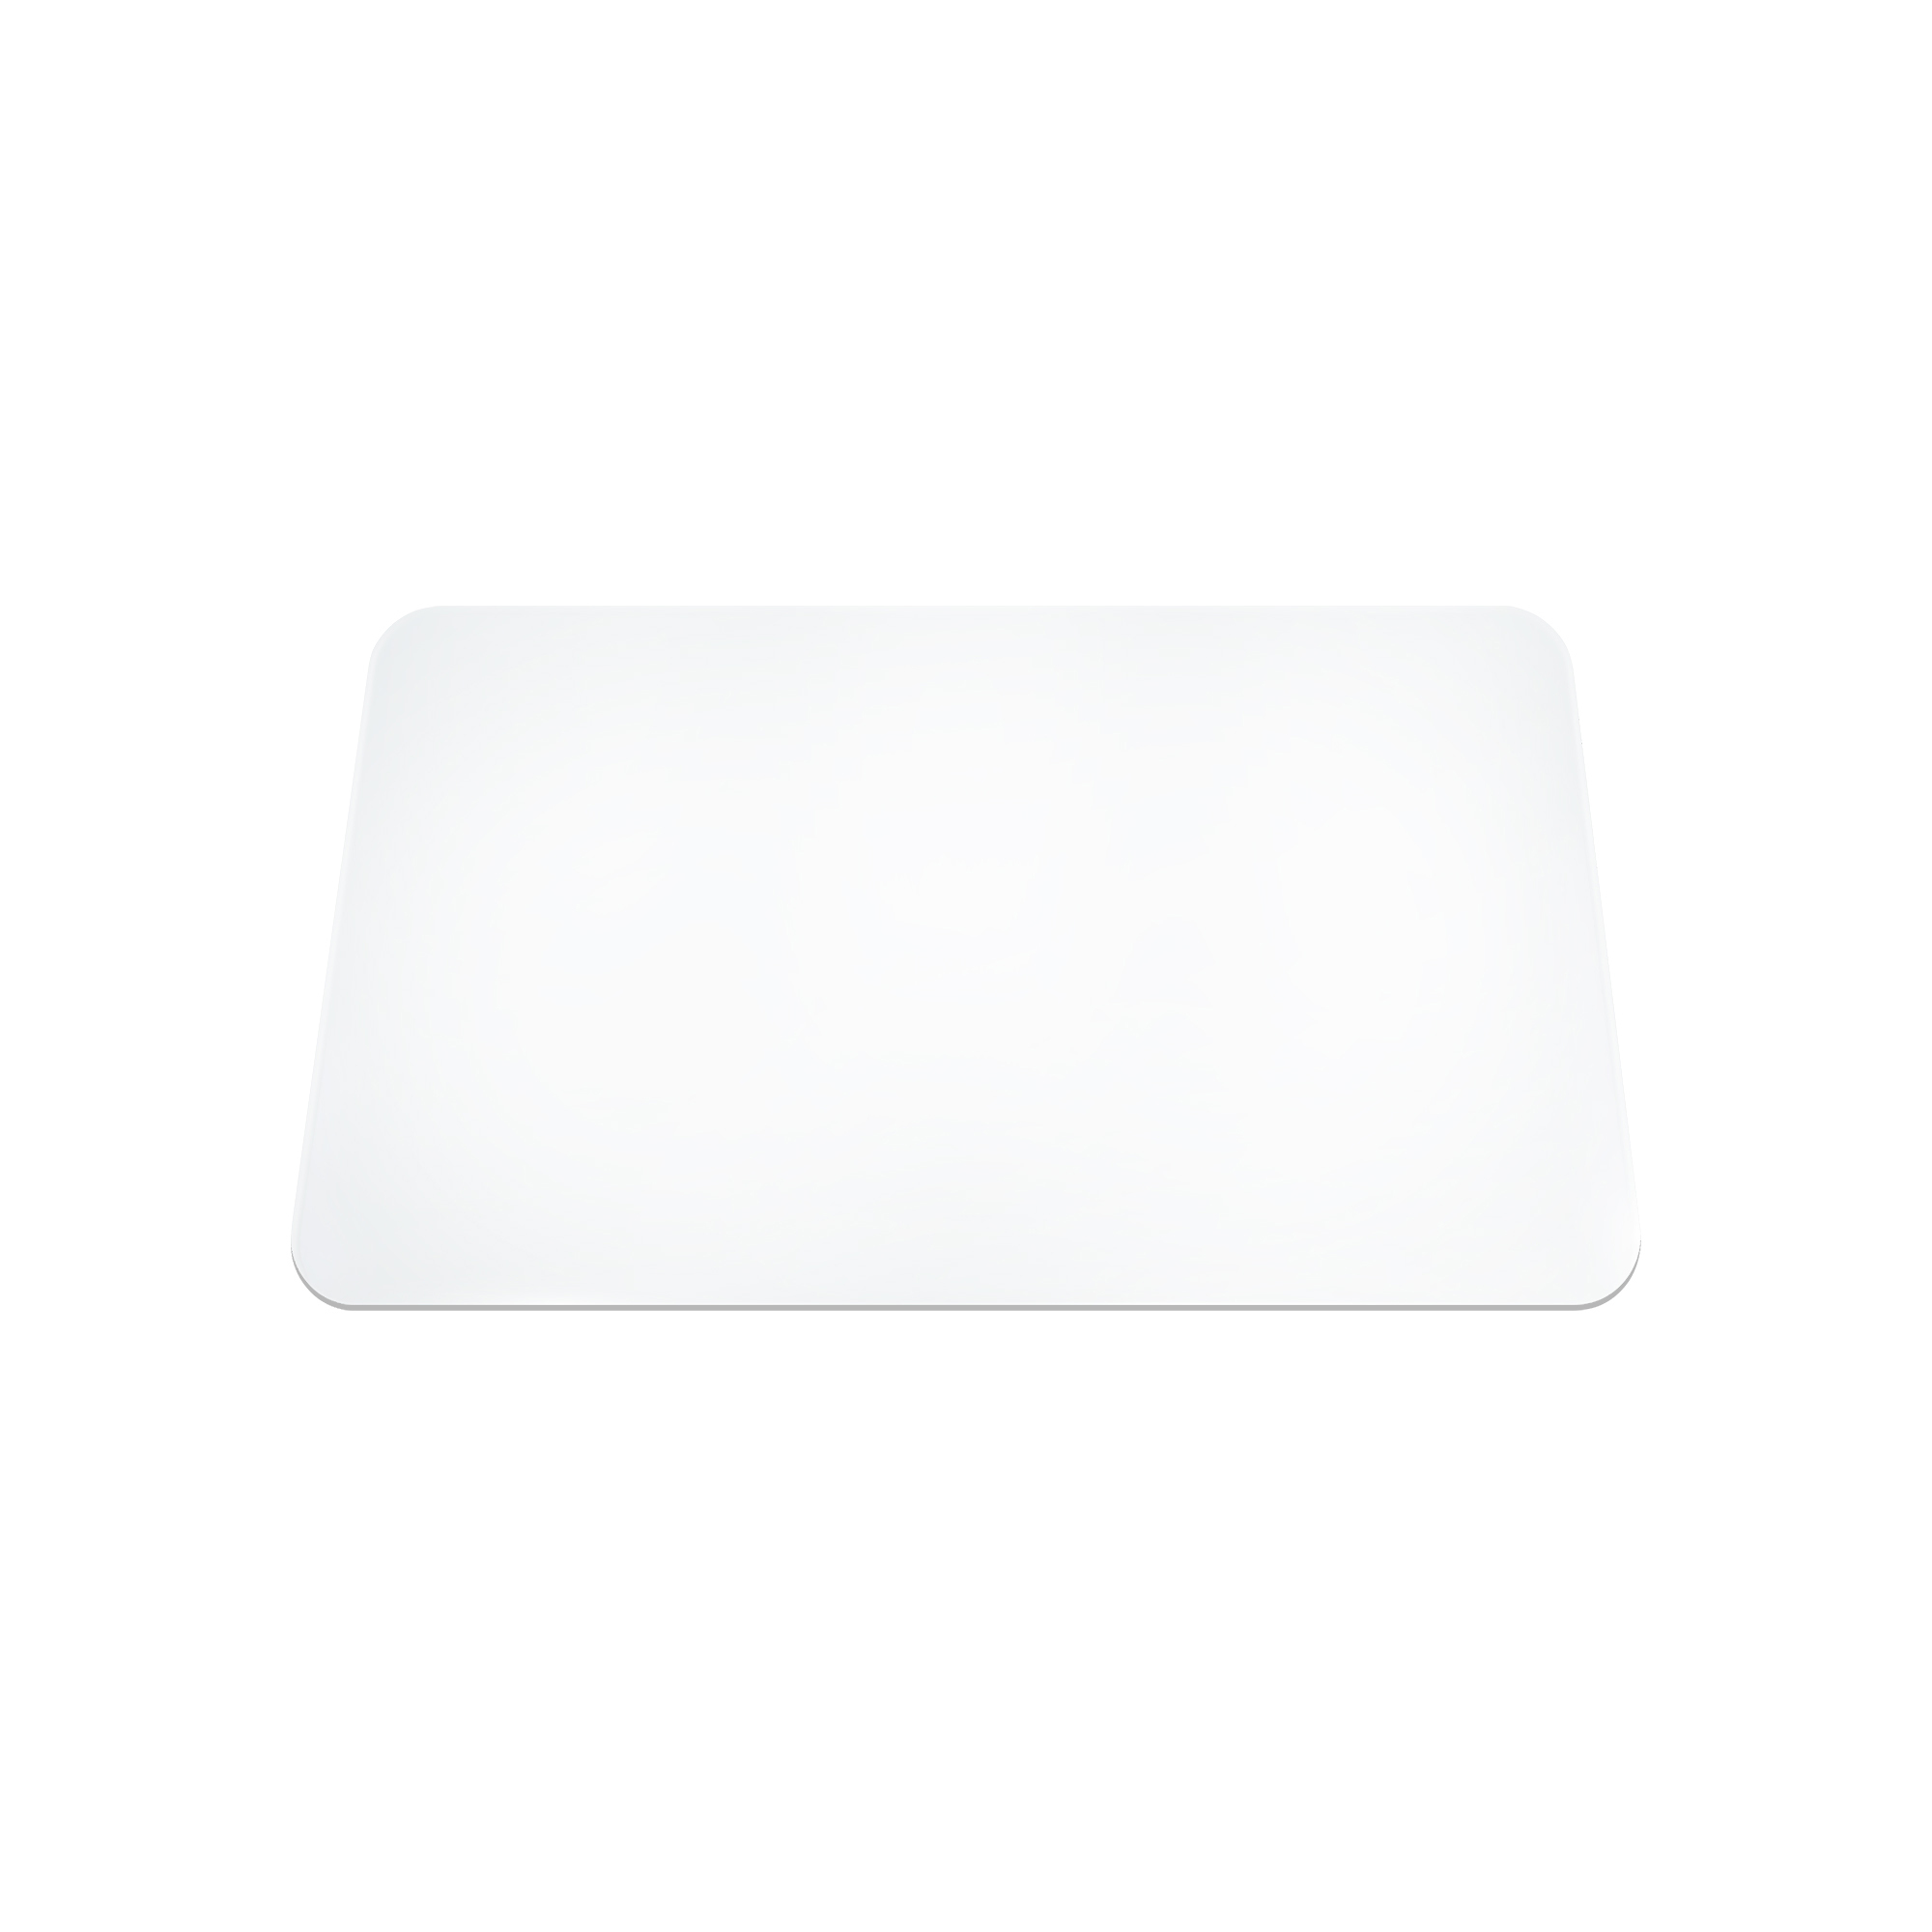 Aleco ES Robbins, Clear Rectangle Desk Pad, 36Inchx20Inch, Length 20 in, Width 36 in, Material Vinyl, Model 120737